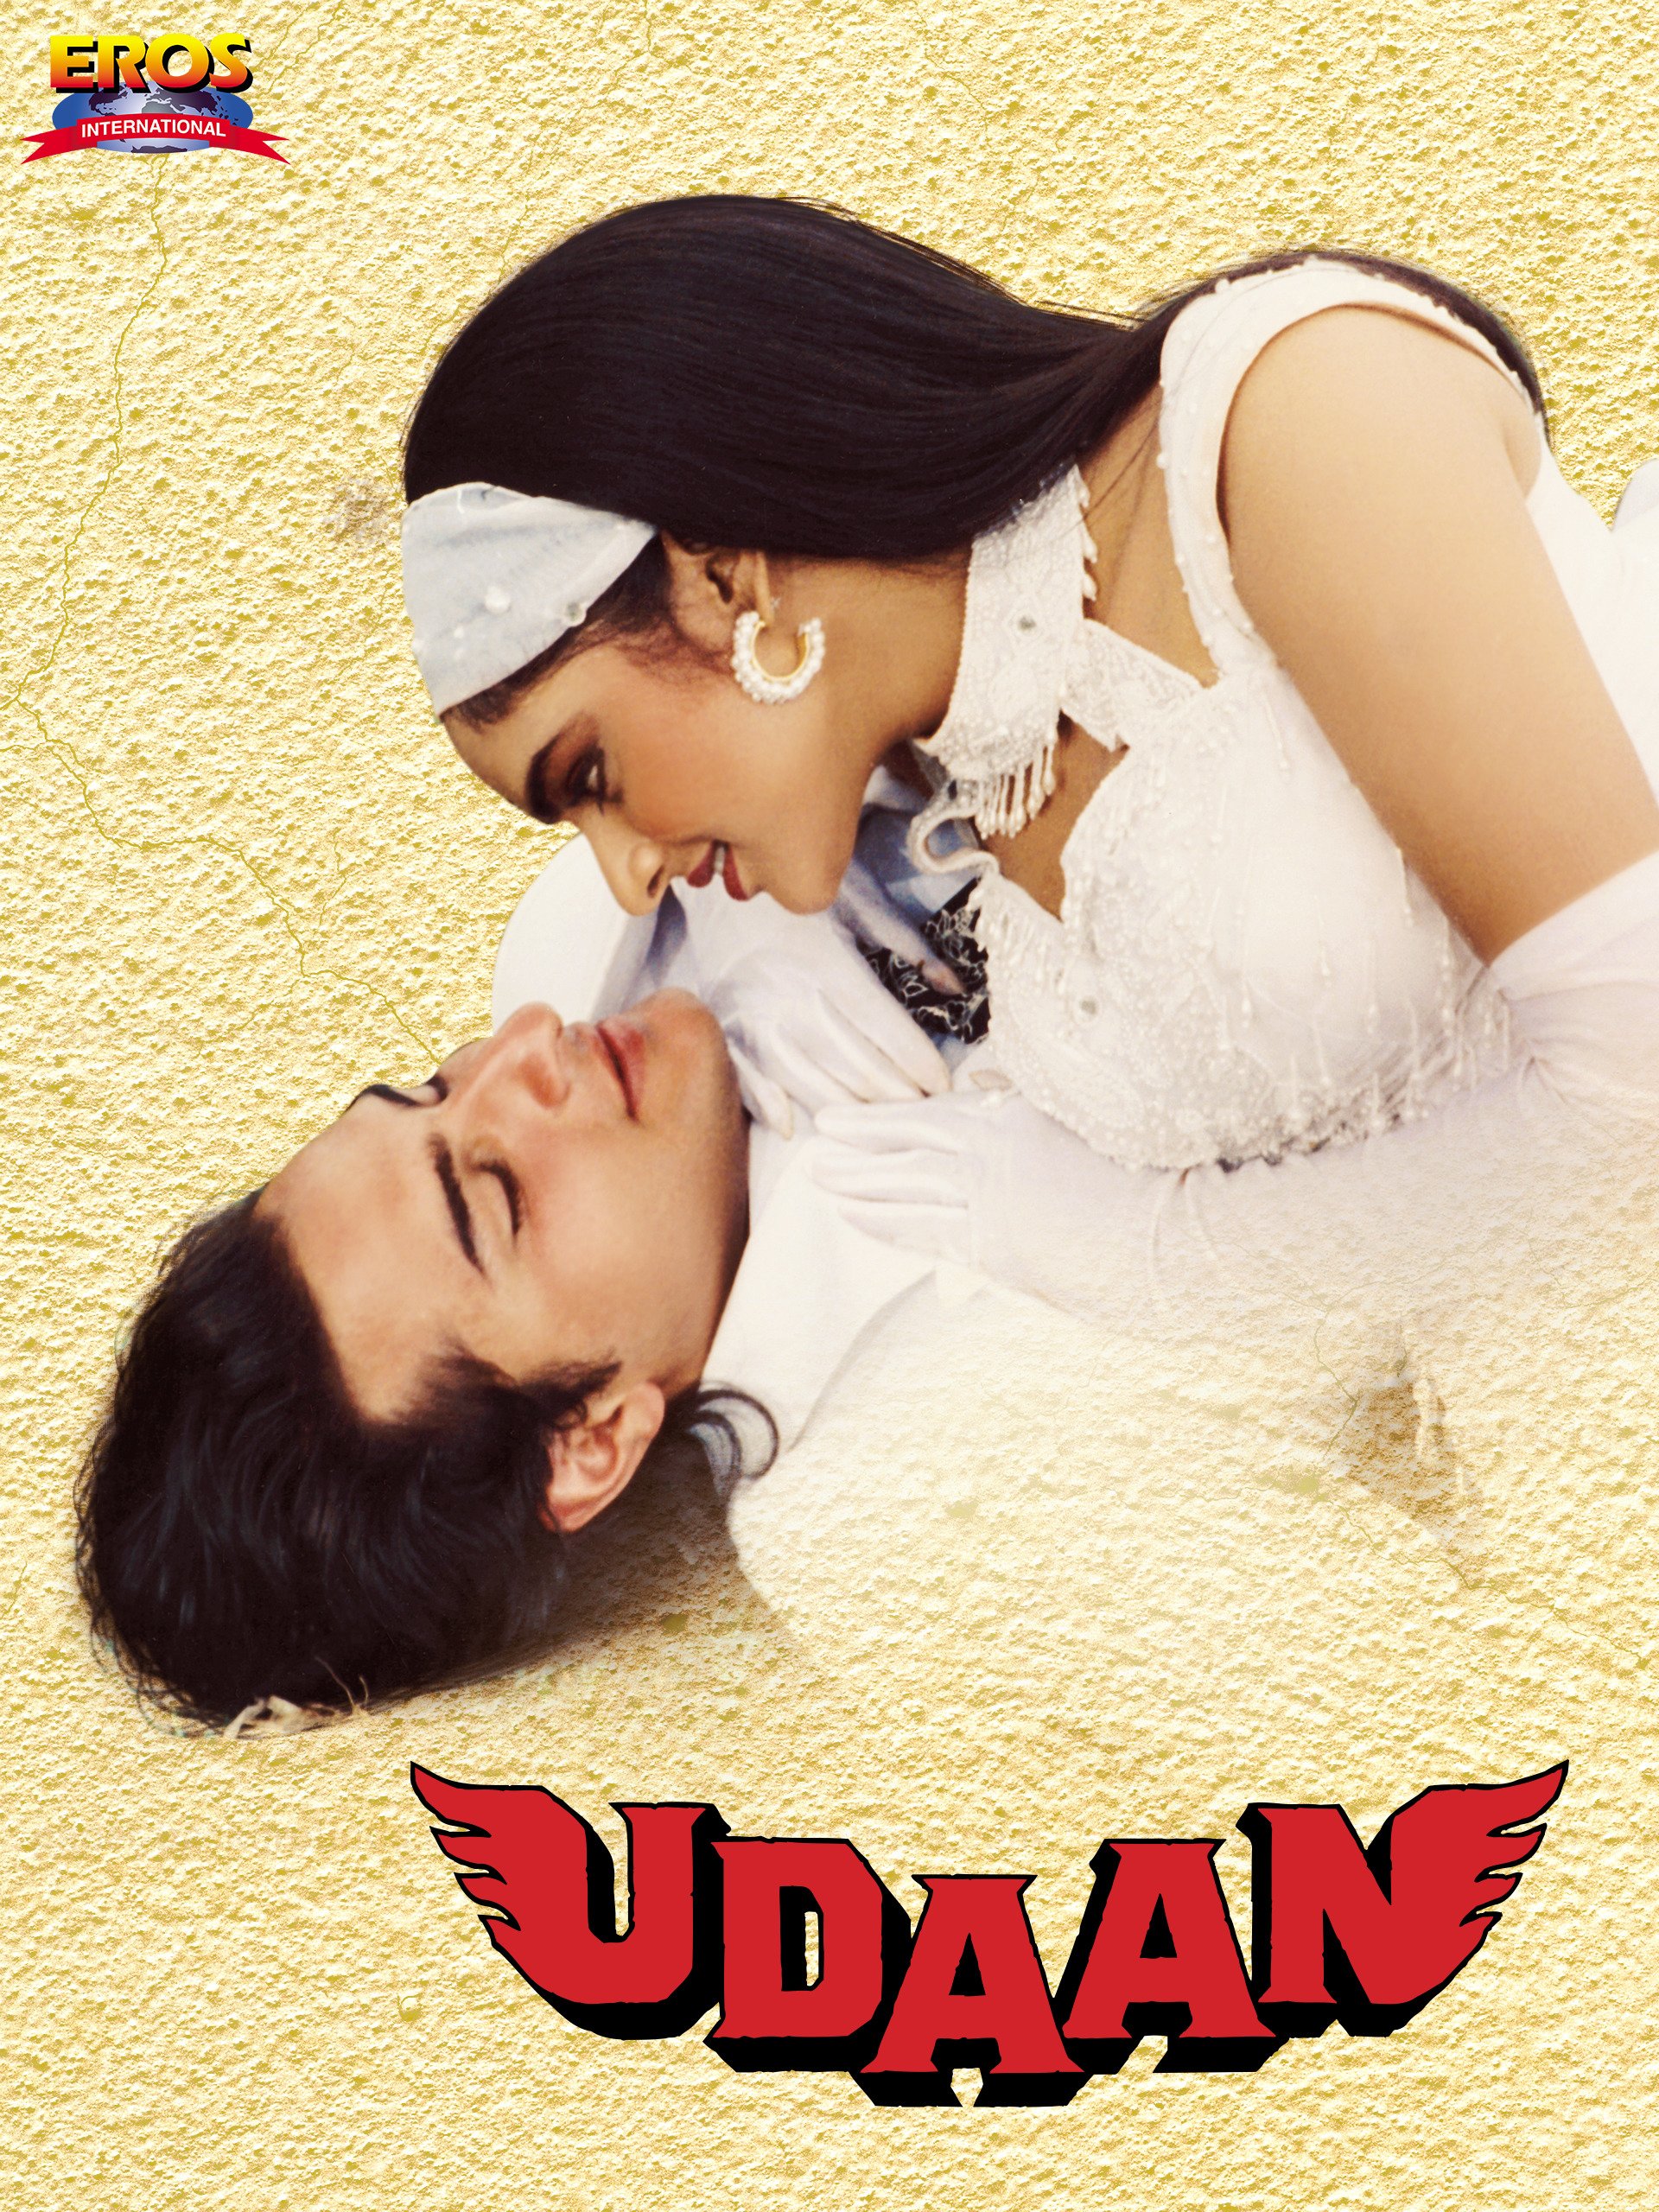 Udaan Movie: Review | Release Date (1997) | Songs | Music | Images |  Official Trailers | Videos | Photos | News - Bollywood Hungama